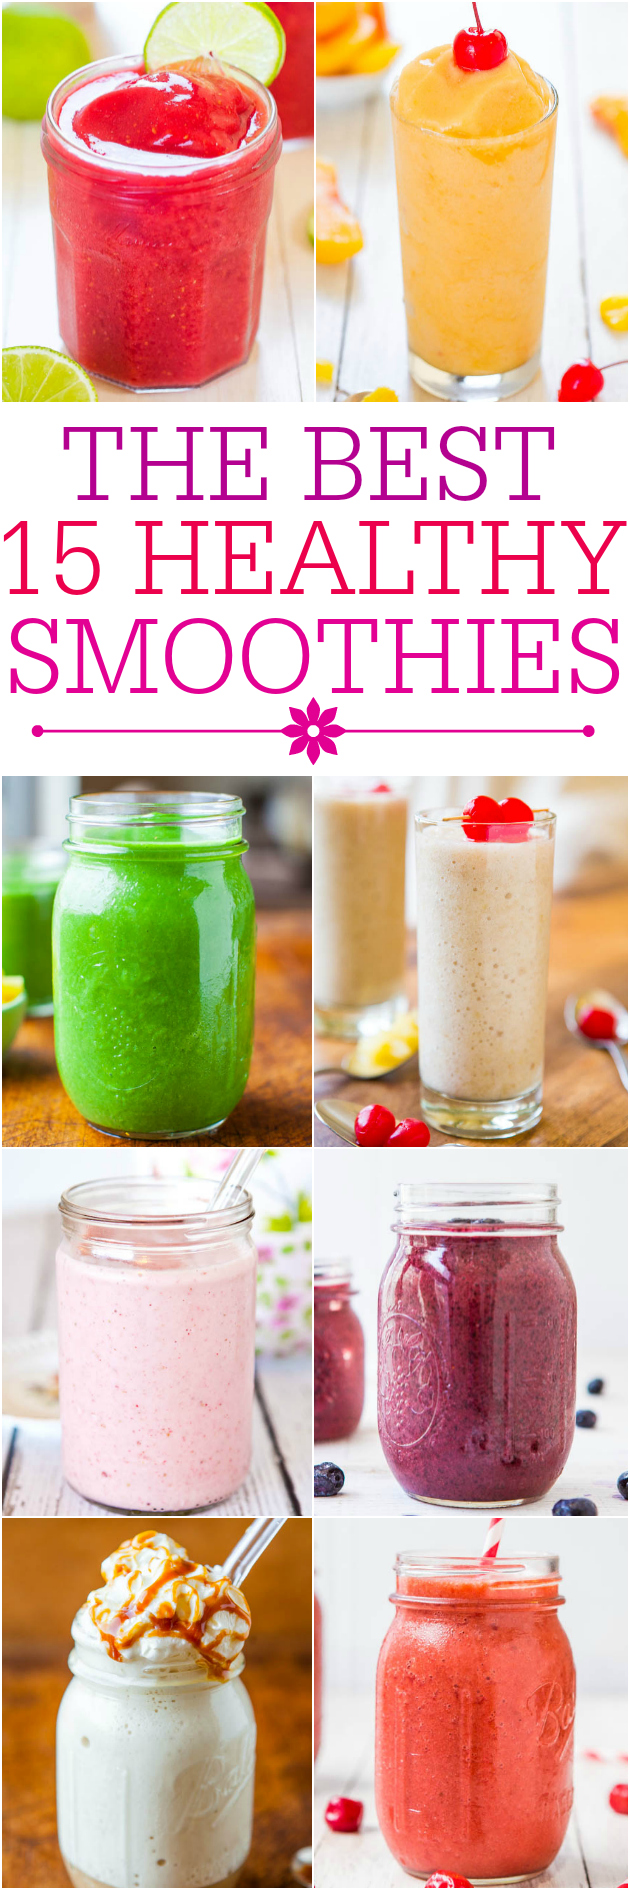 The Best 15 Healthy Smoothies - Fast, easy, and tasty smoothie recipes that'll keep you full and satisfied and are skinny jeans-friendly! 